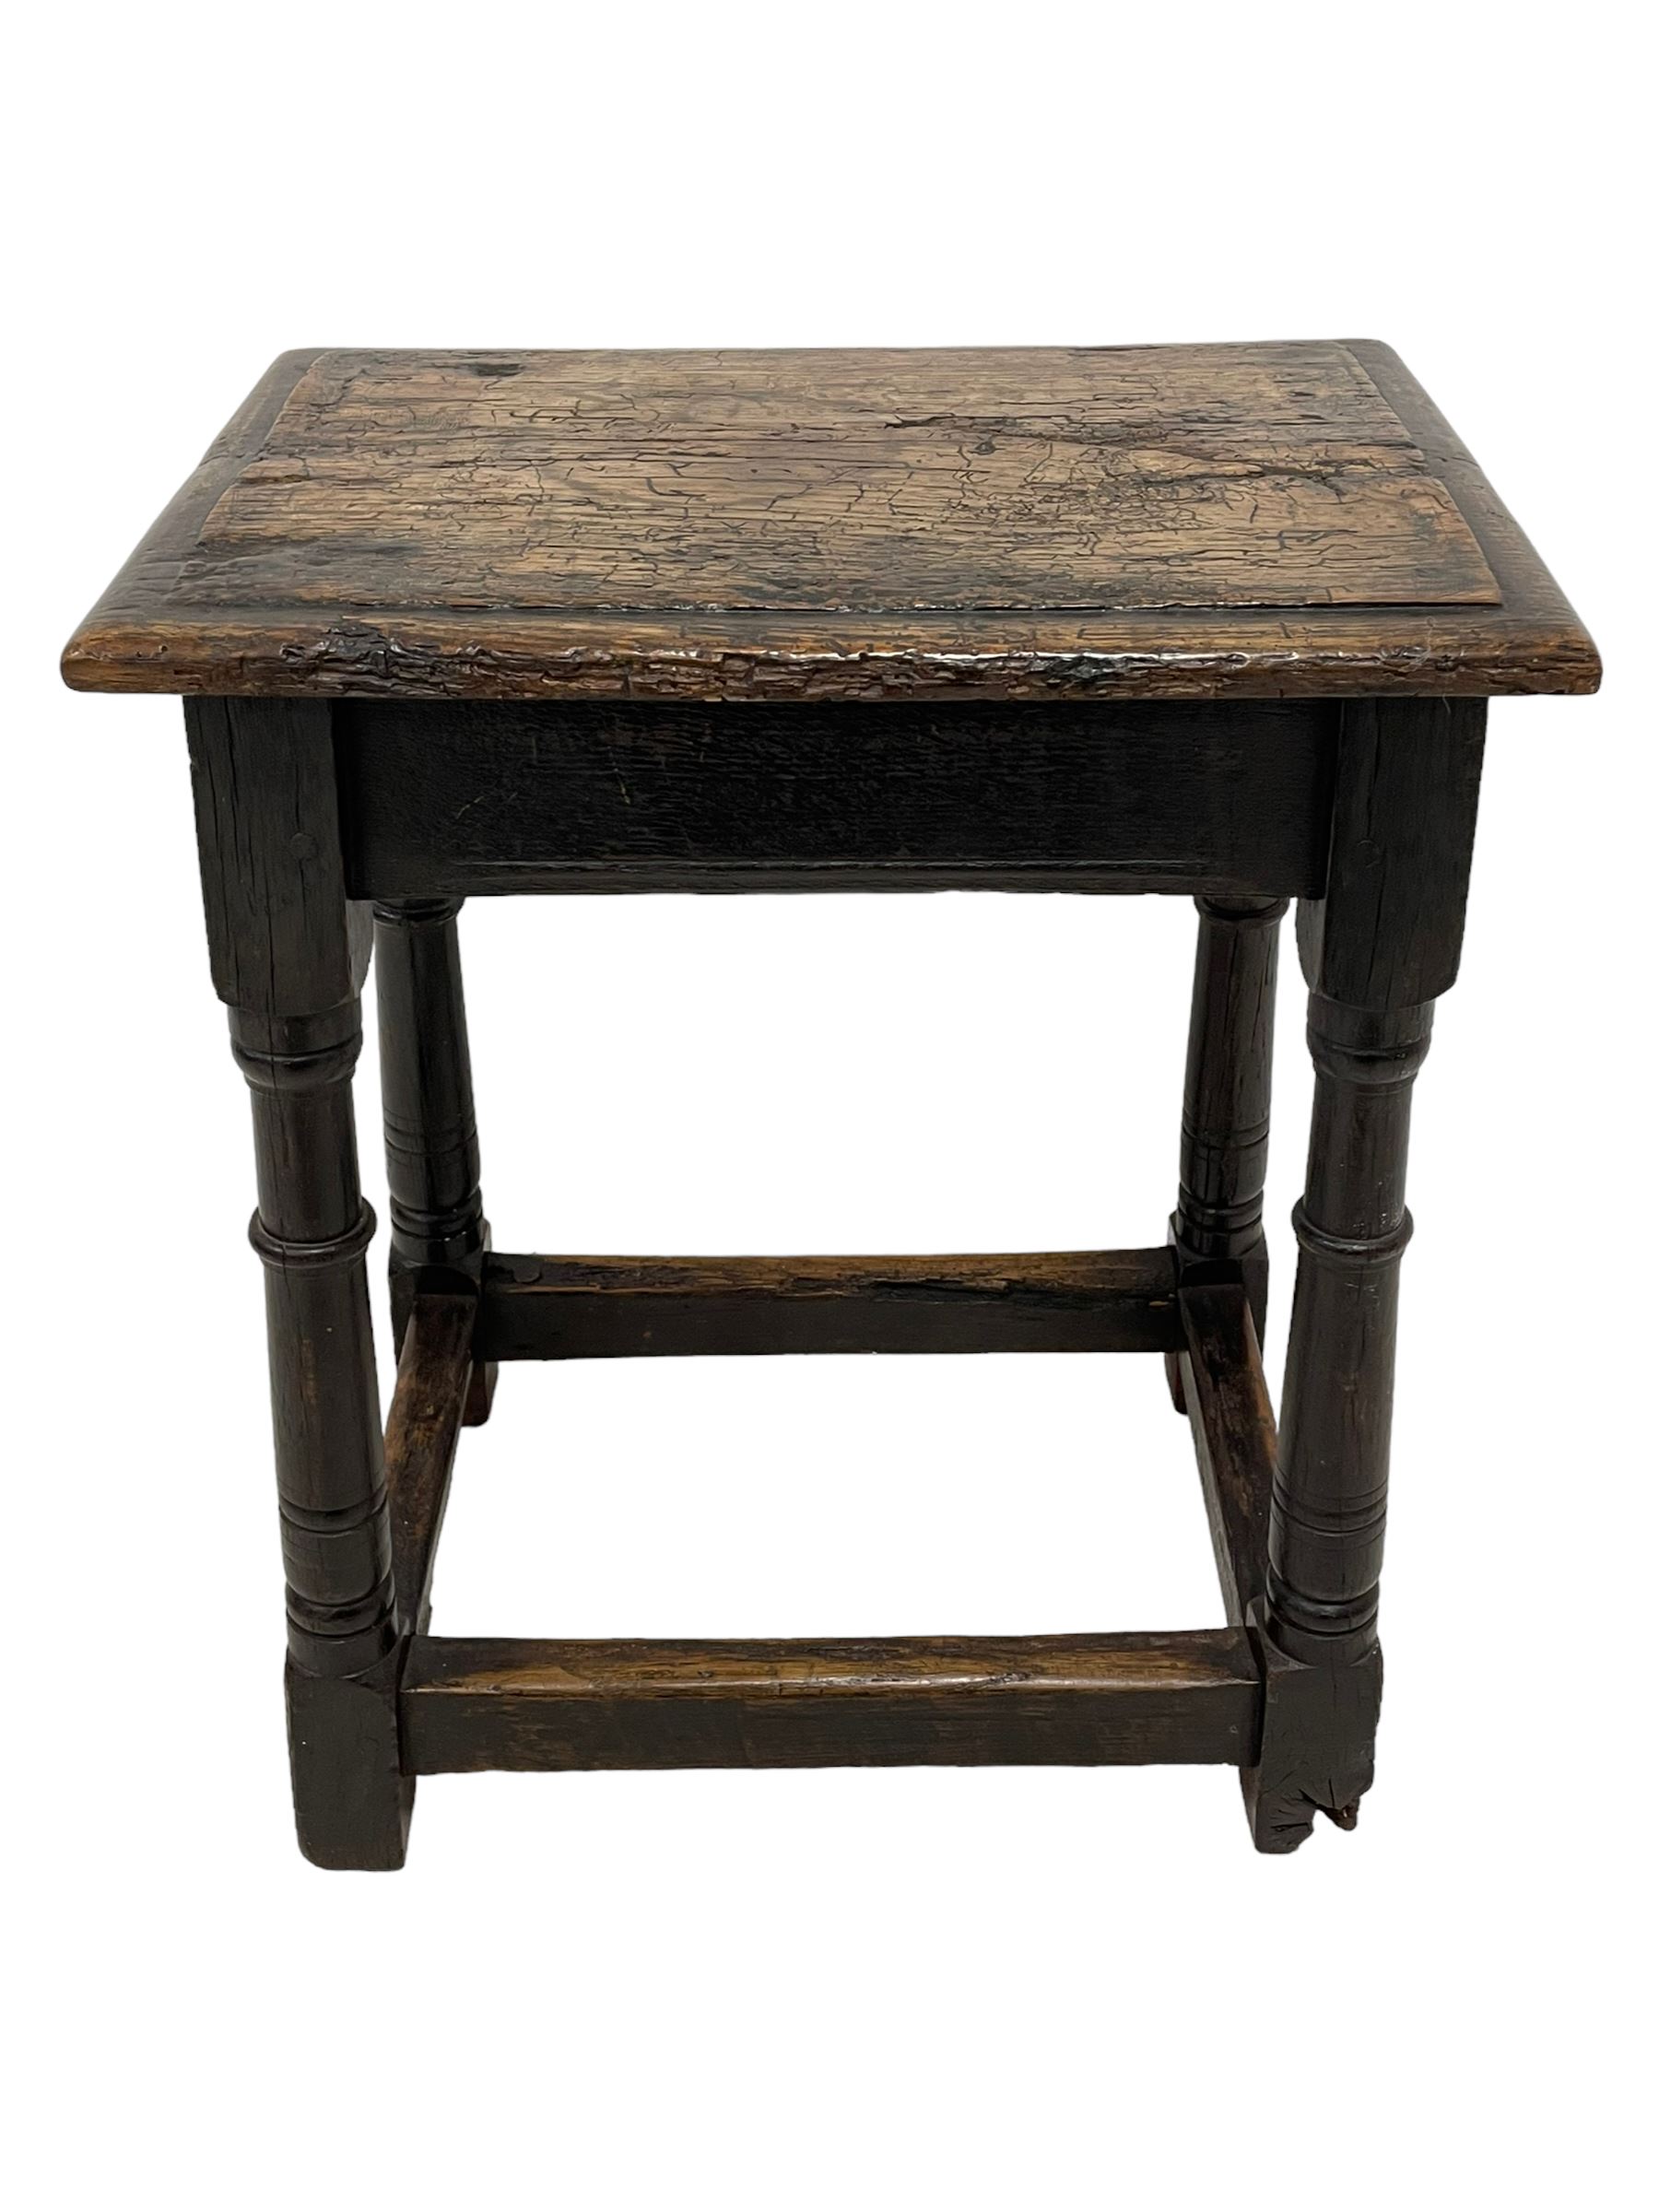 17th century oak joint coffin stool - Image 2 of 8